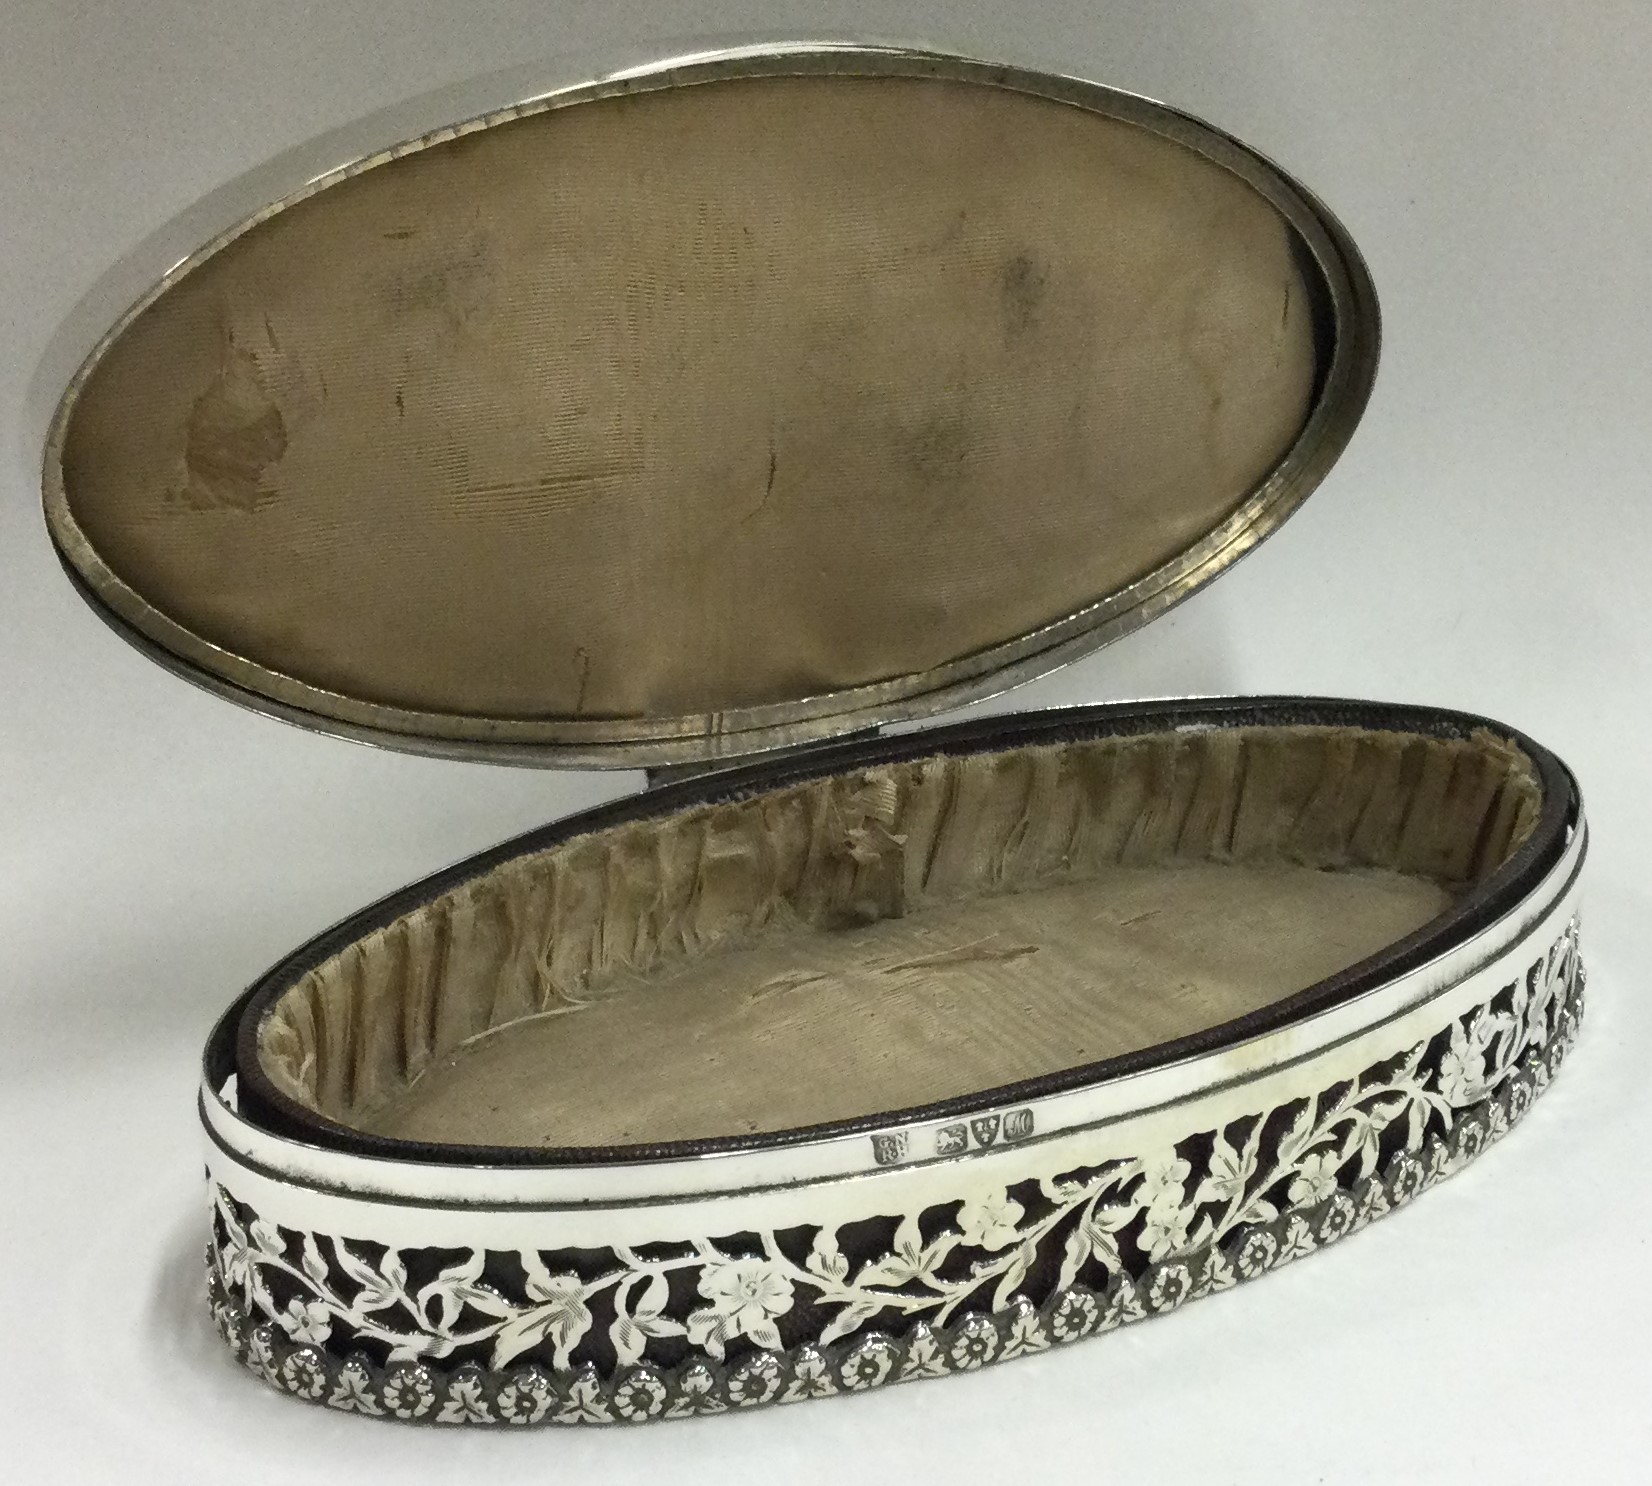 CHESTER: An Edwardian silver pierced jewellery box. 1912. By George Nathan & Ridley Hayes. - Image 3 of 3